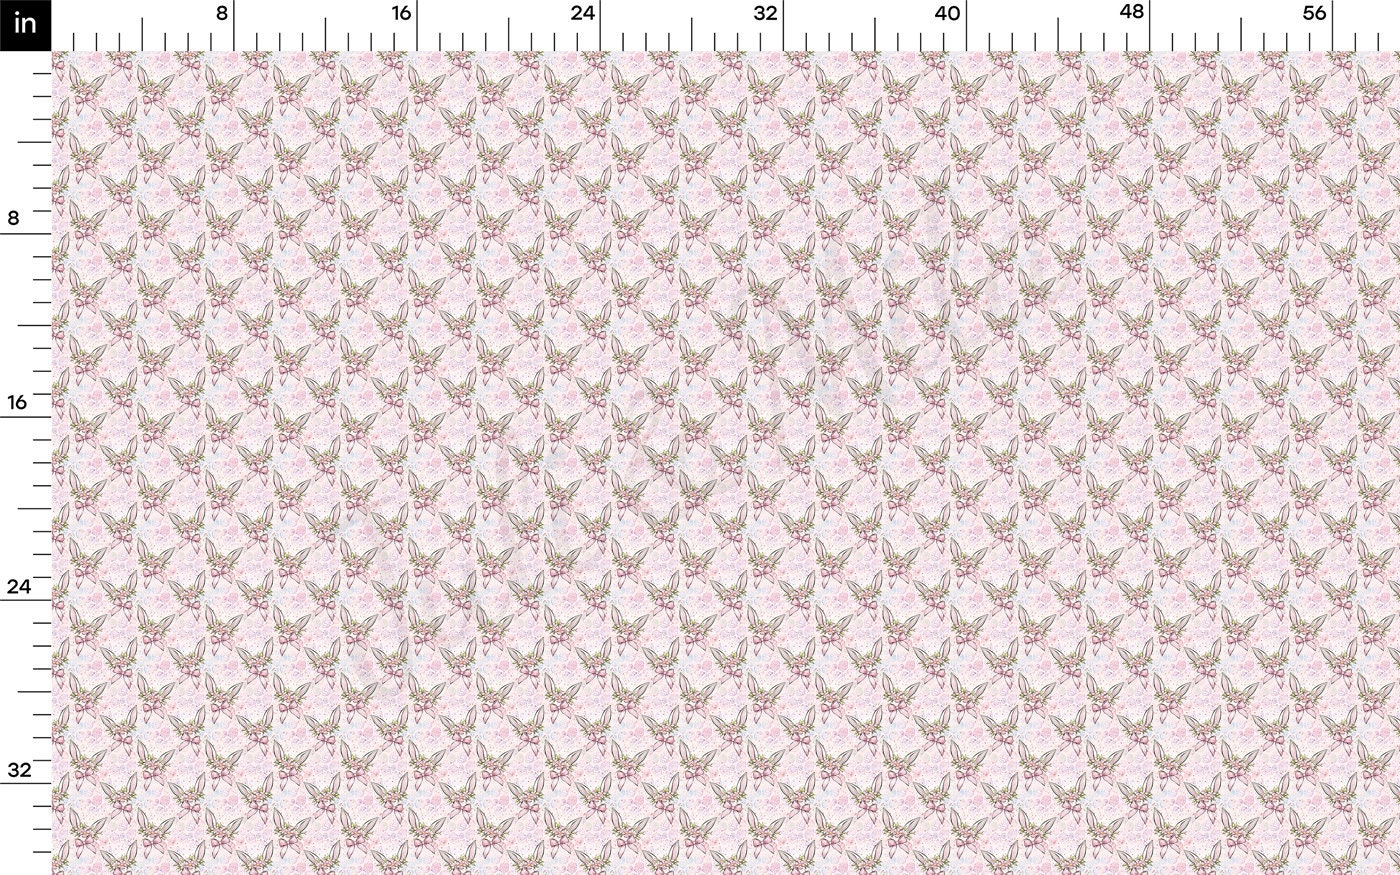 DBP Fabric Double Brushed Polyester DBP2628 Easter